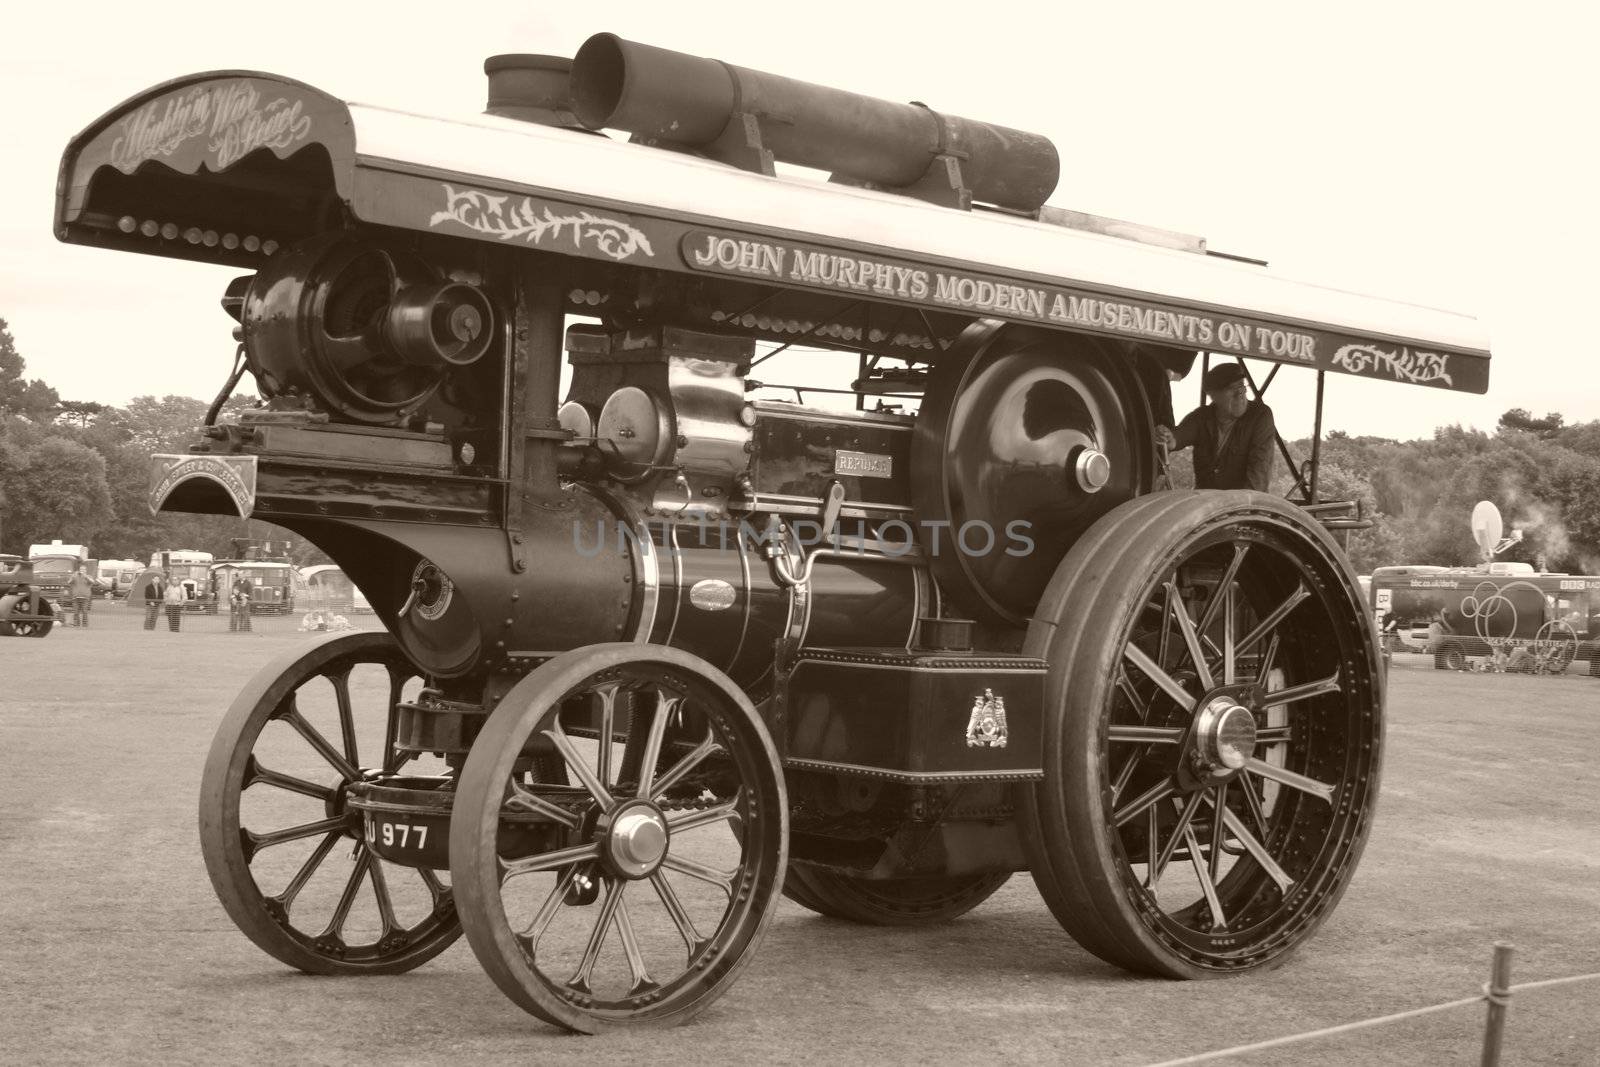 large black and blue traction steam engine at a steam rally in sepia tones